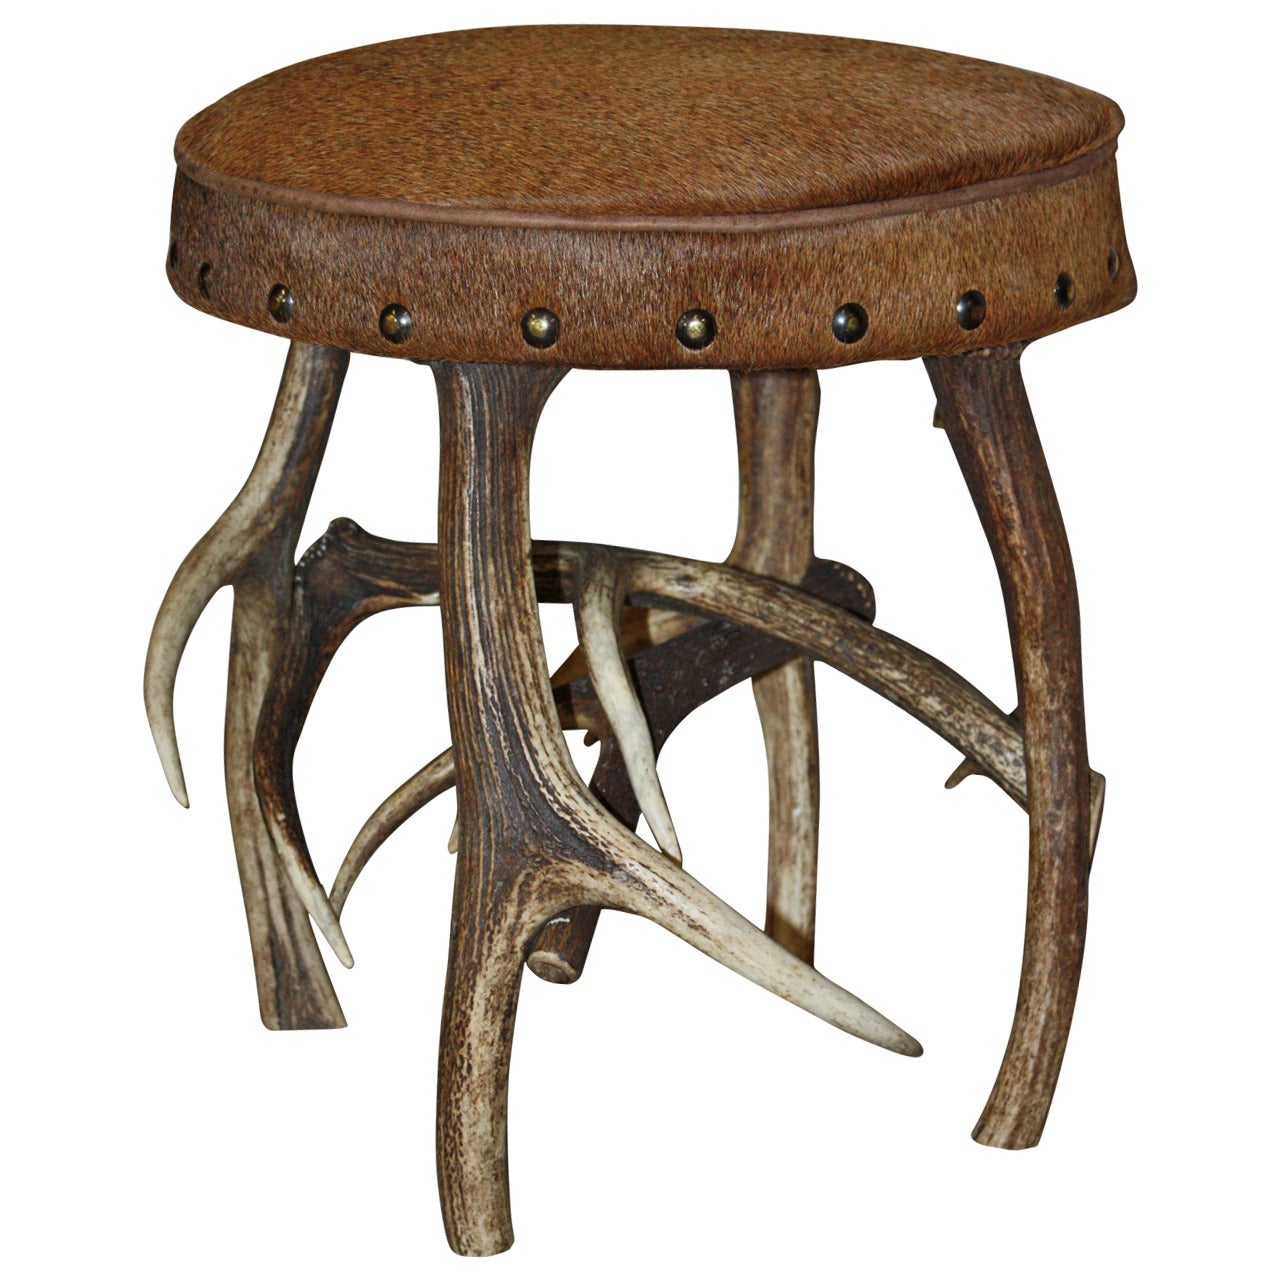 Stag Horn Based Stool with Hide Upholstery